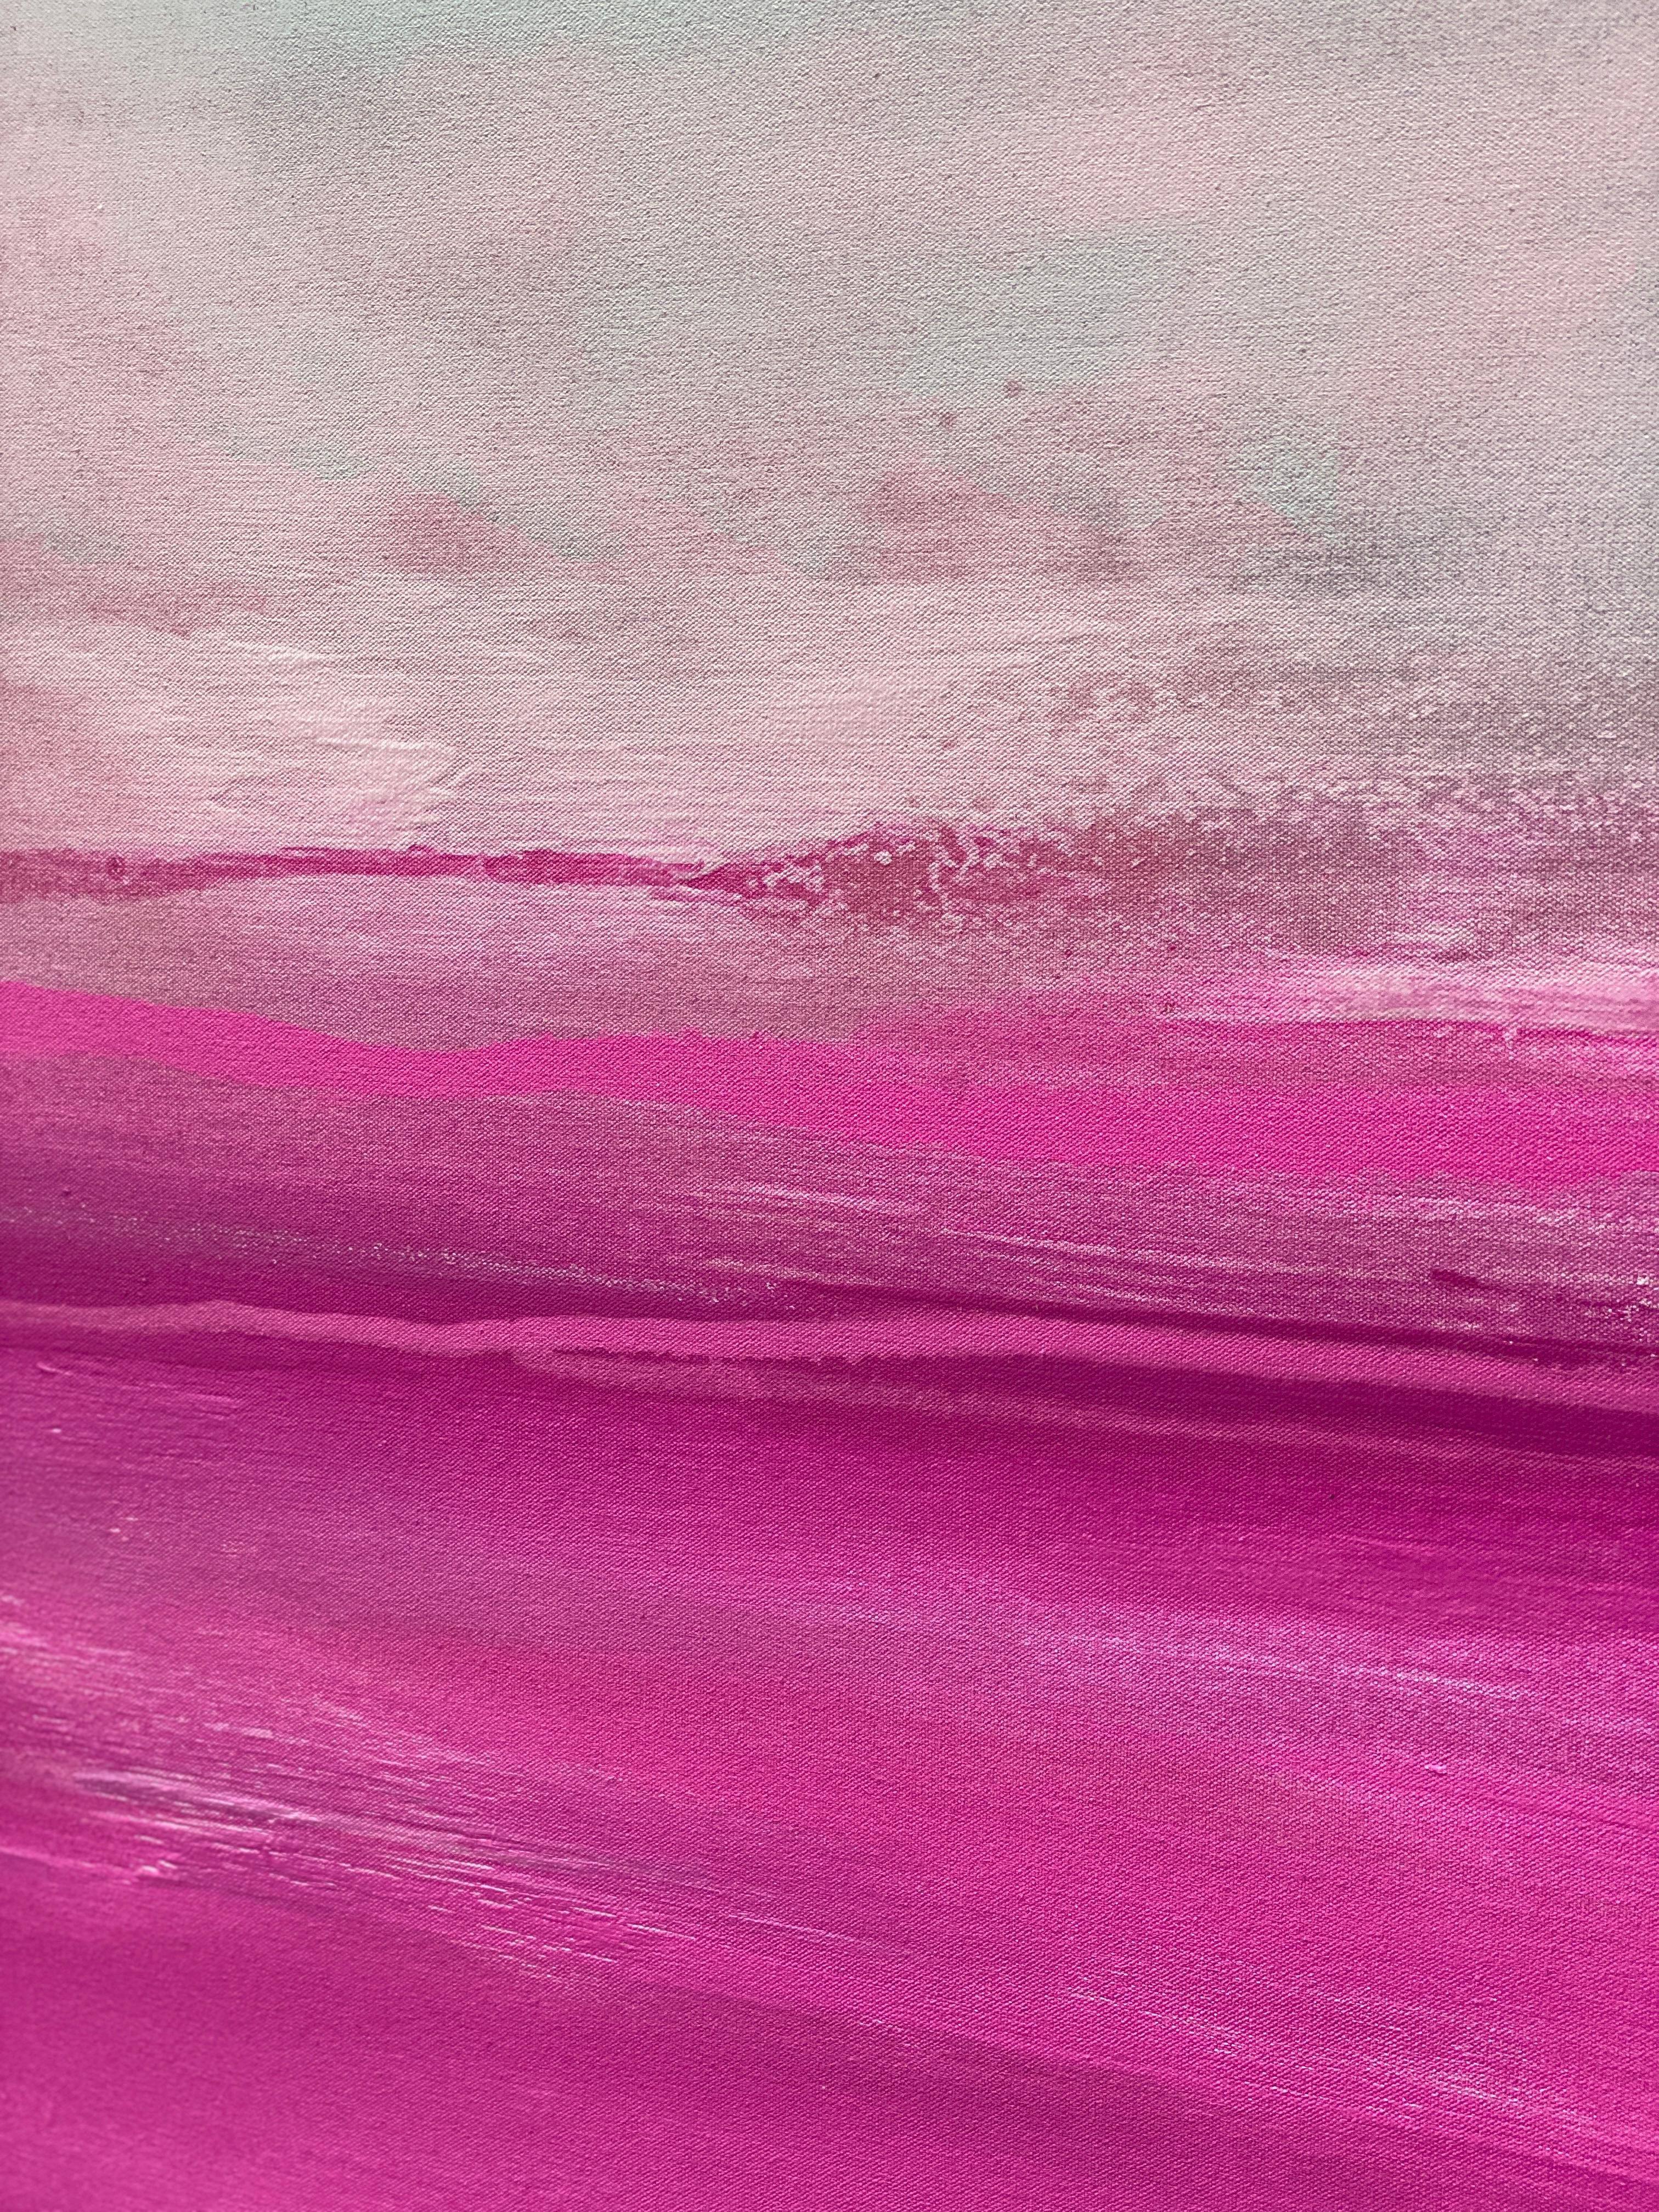 Elegance large abstract seascape on canvas in bright pink light grey white - Purple Abstract Painting by Kathleen Rhee